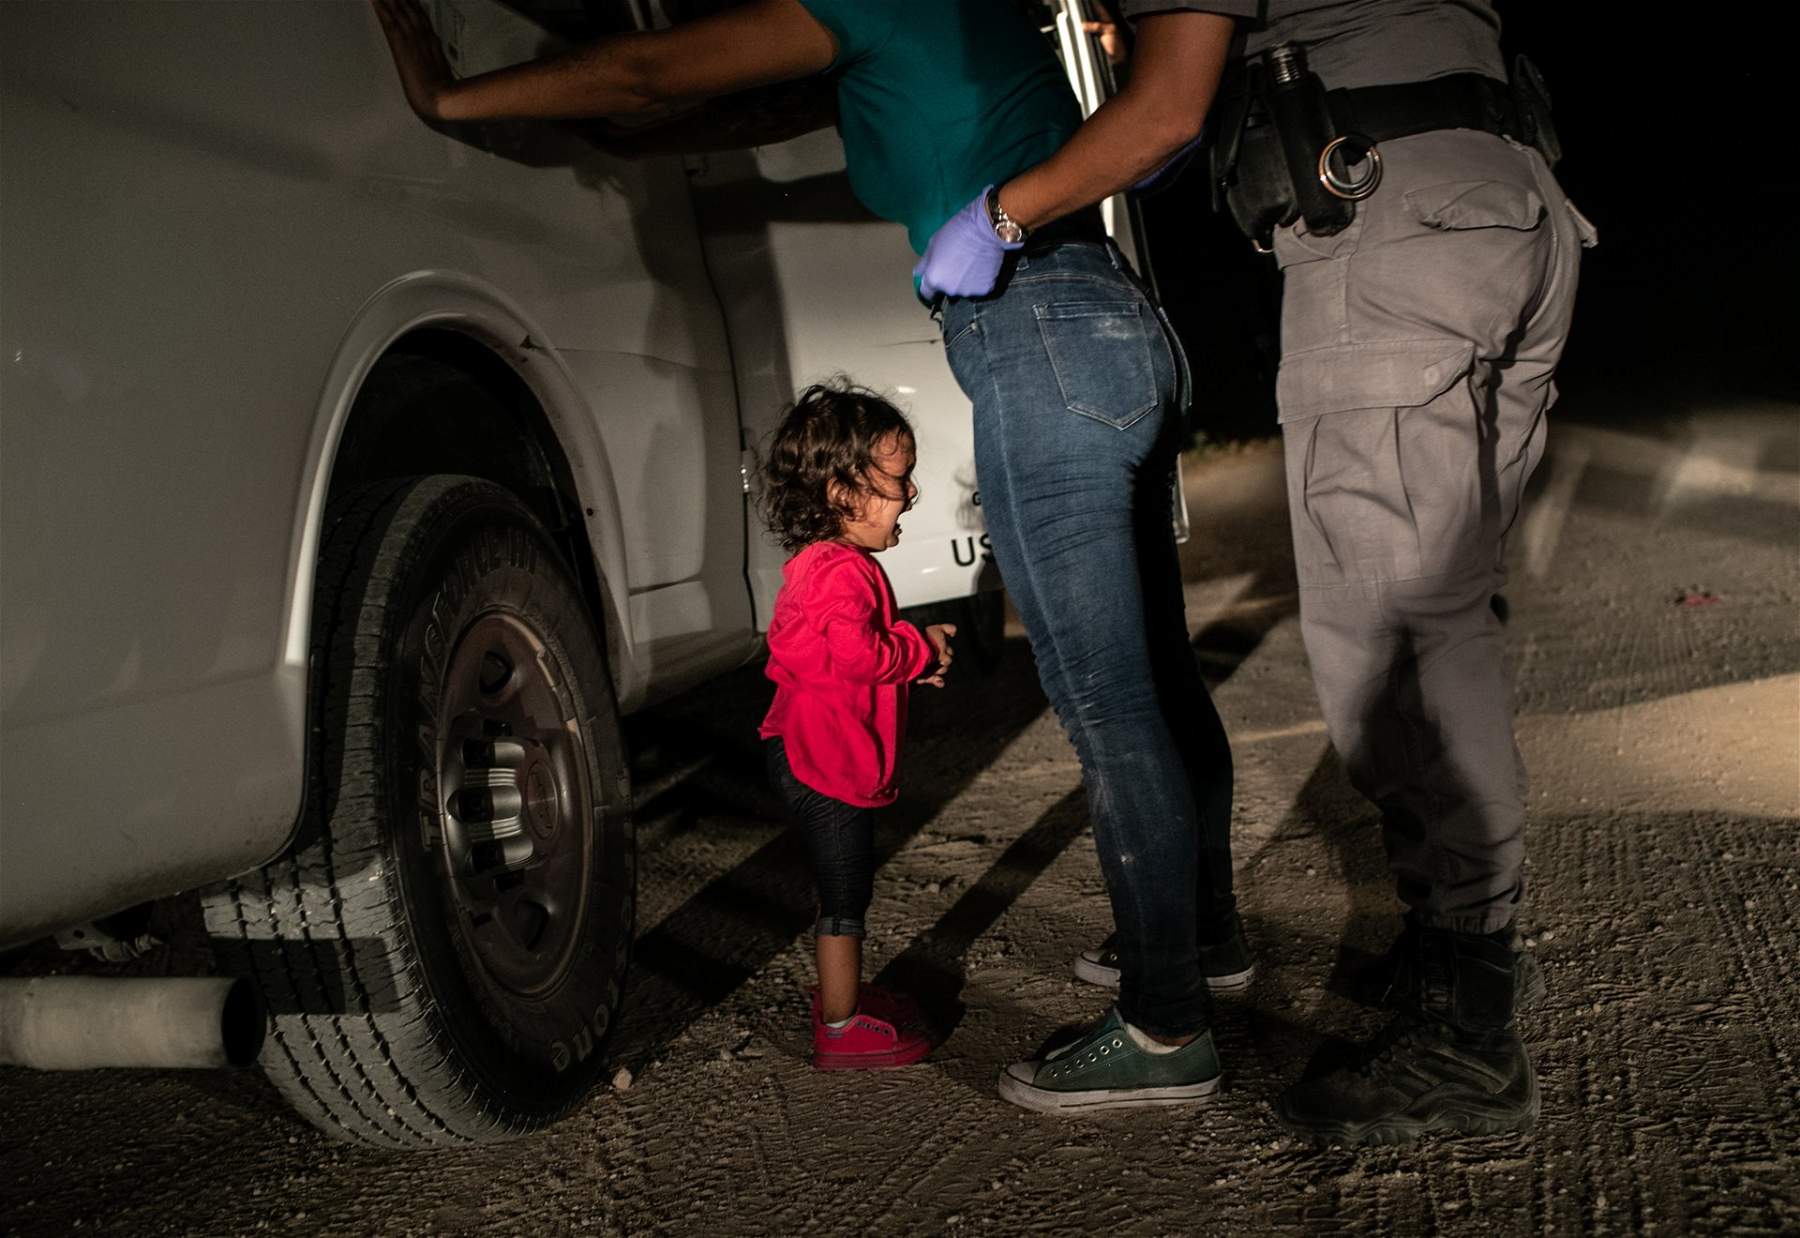 World Press, photo of the year is little girl crying at US/Mexico border, by John Moore. Italy shines